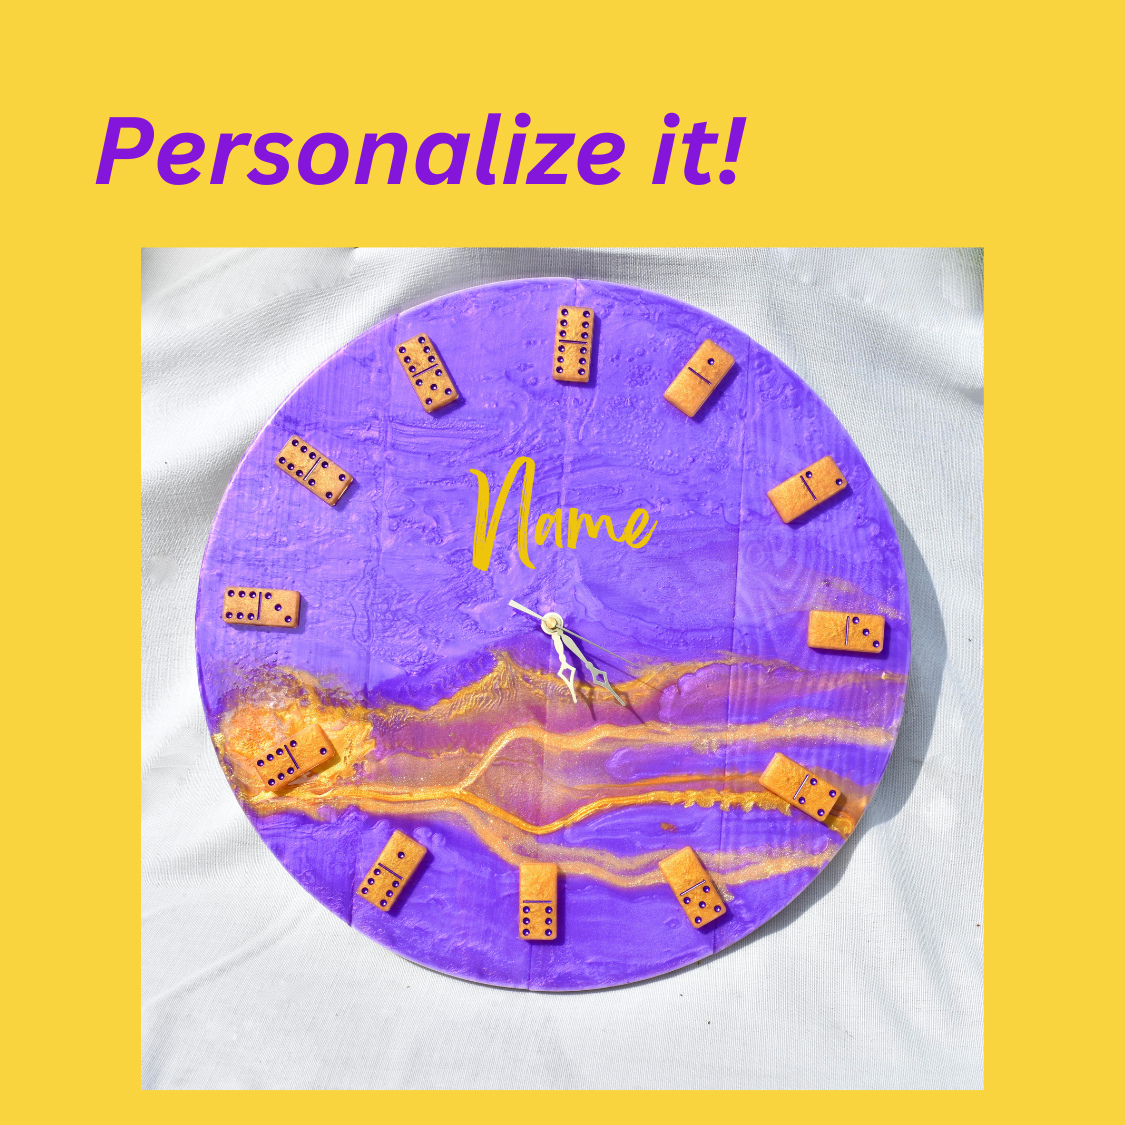 Purple & Gold Dominoes Wall Clock • Fraternity Dominoes Wall Clock • Father’s Day Wall Clock